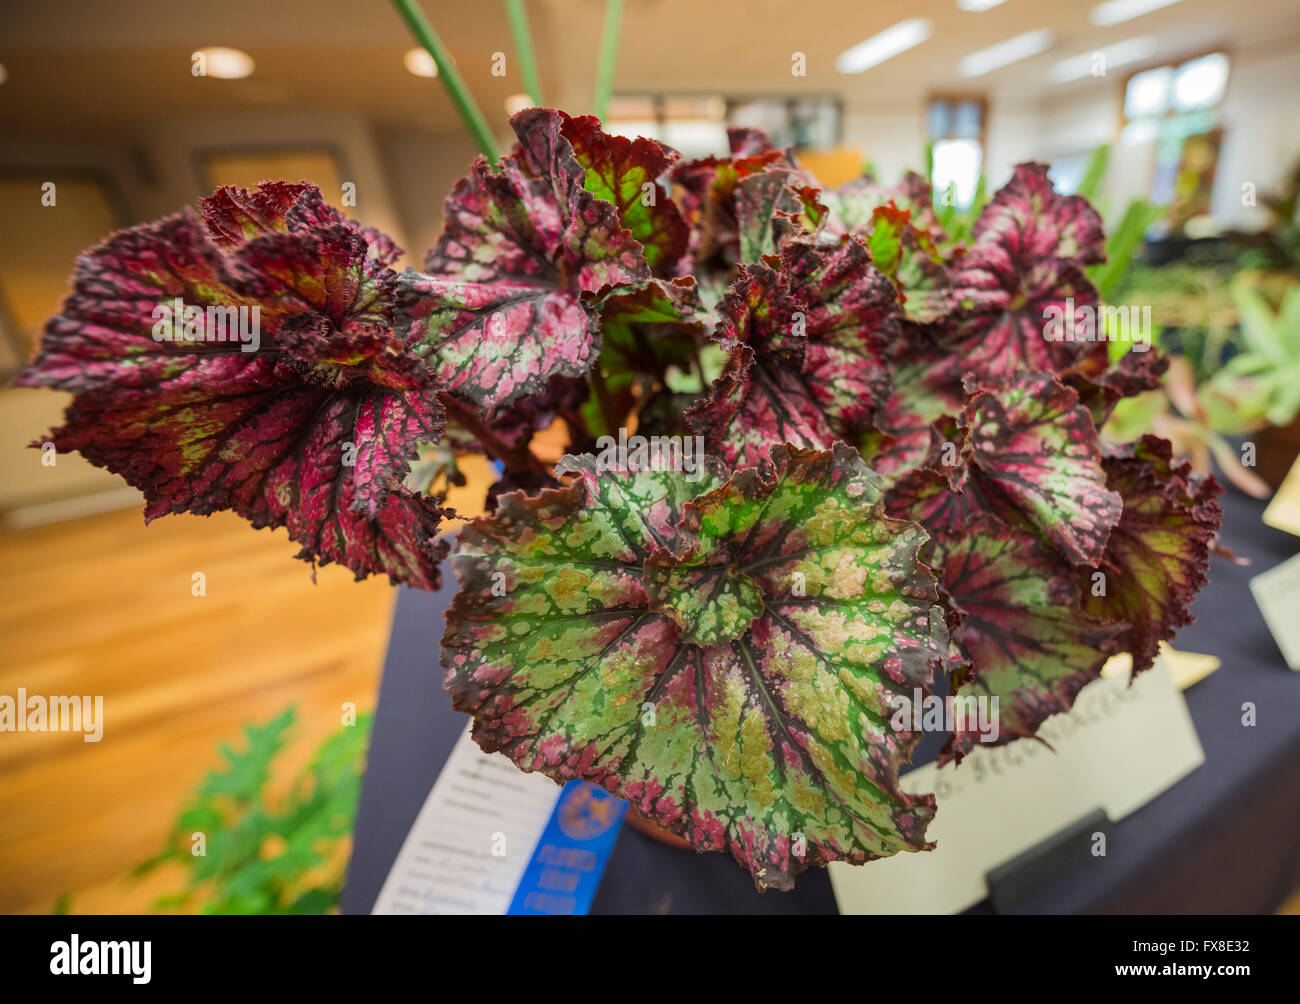 Spring garden festival in North Central Florida. A Rex begonia on display  at the flower arrangement show area Stock Photo - Alamy